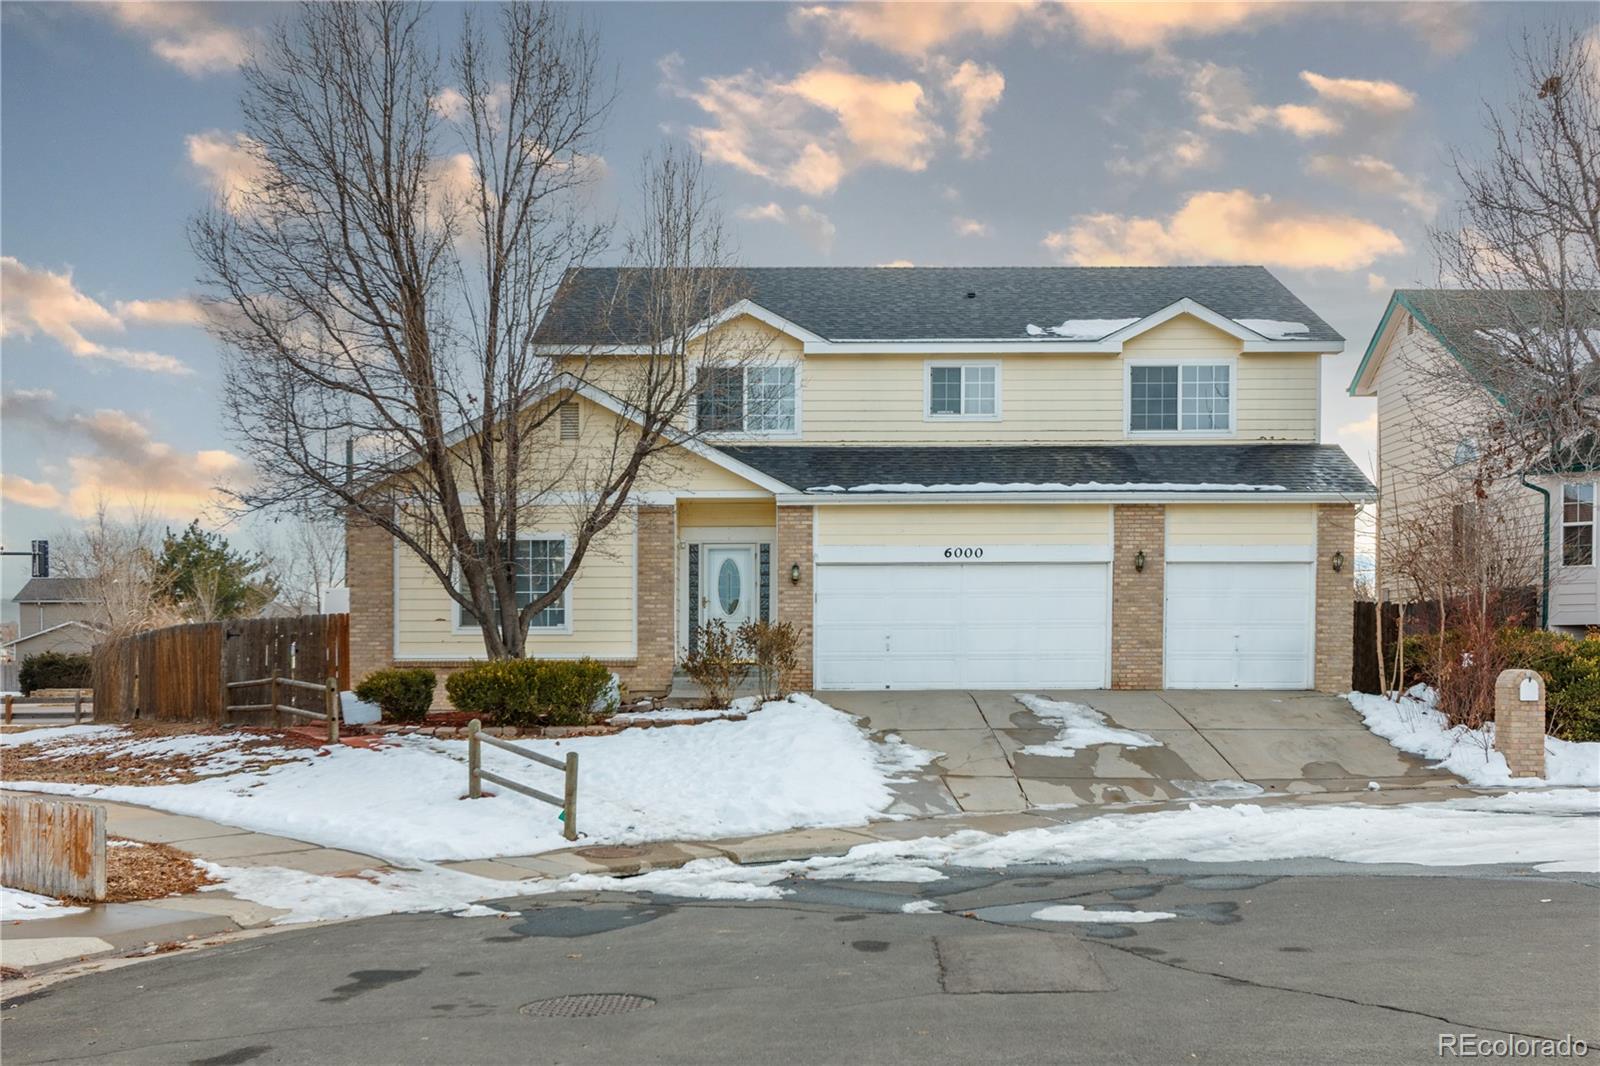 6000 W 112th Place, Westminster, CO 80020 - MLS#: 5100030